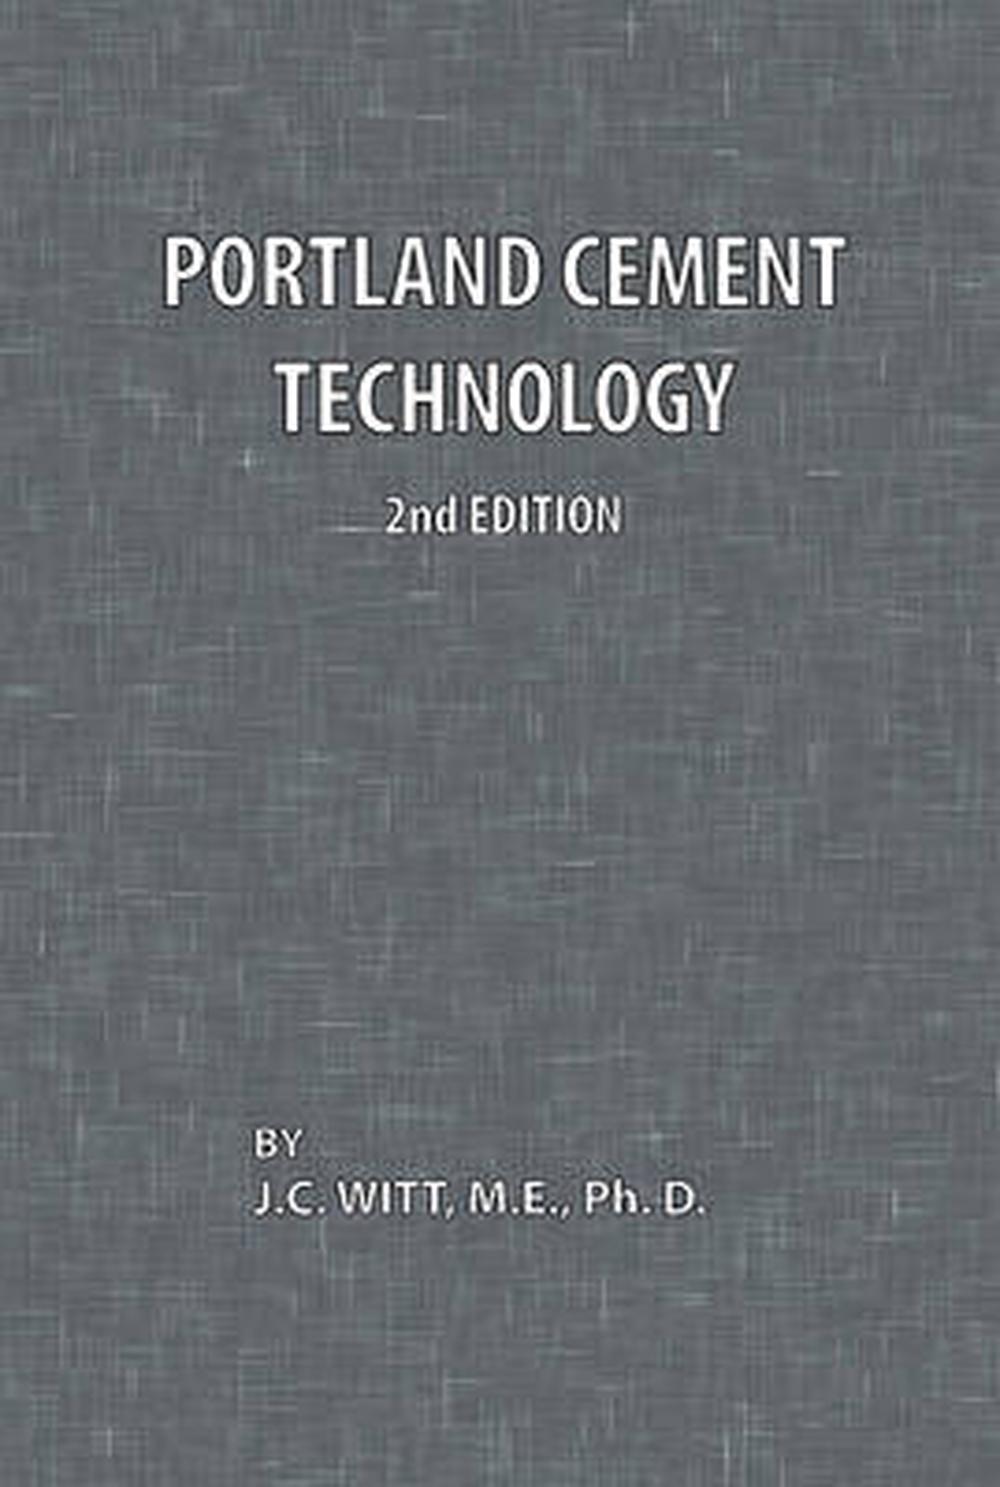 Portland Cement Technology 2nd Edition by J.C. Witt (English) Paperback